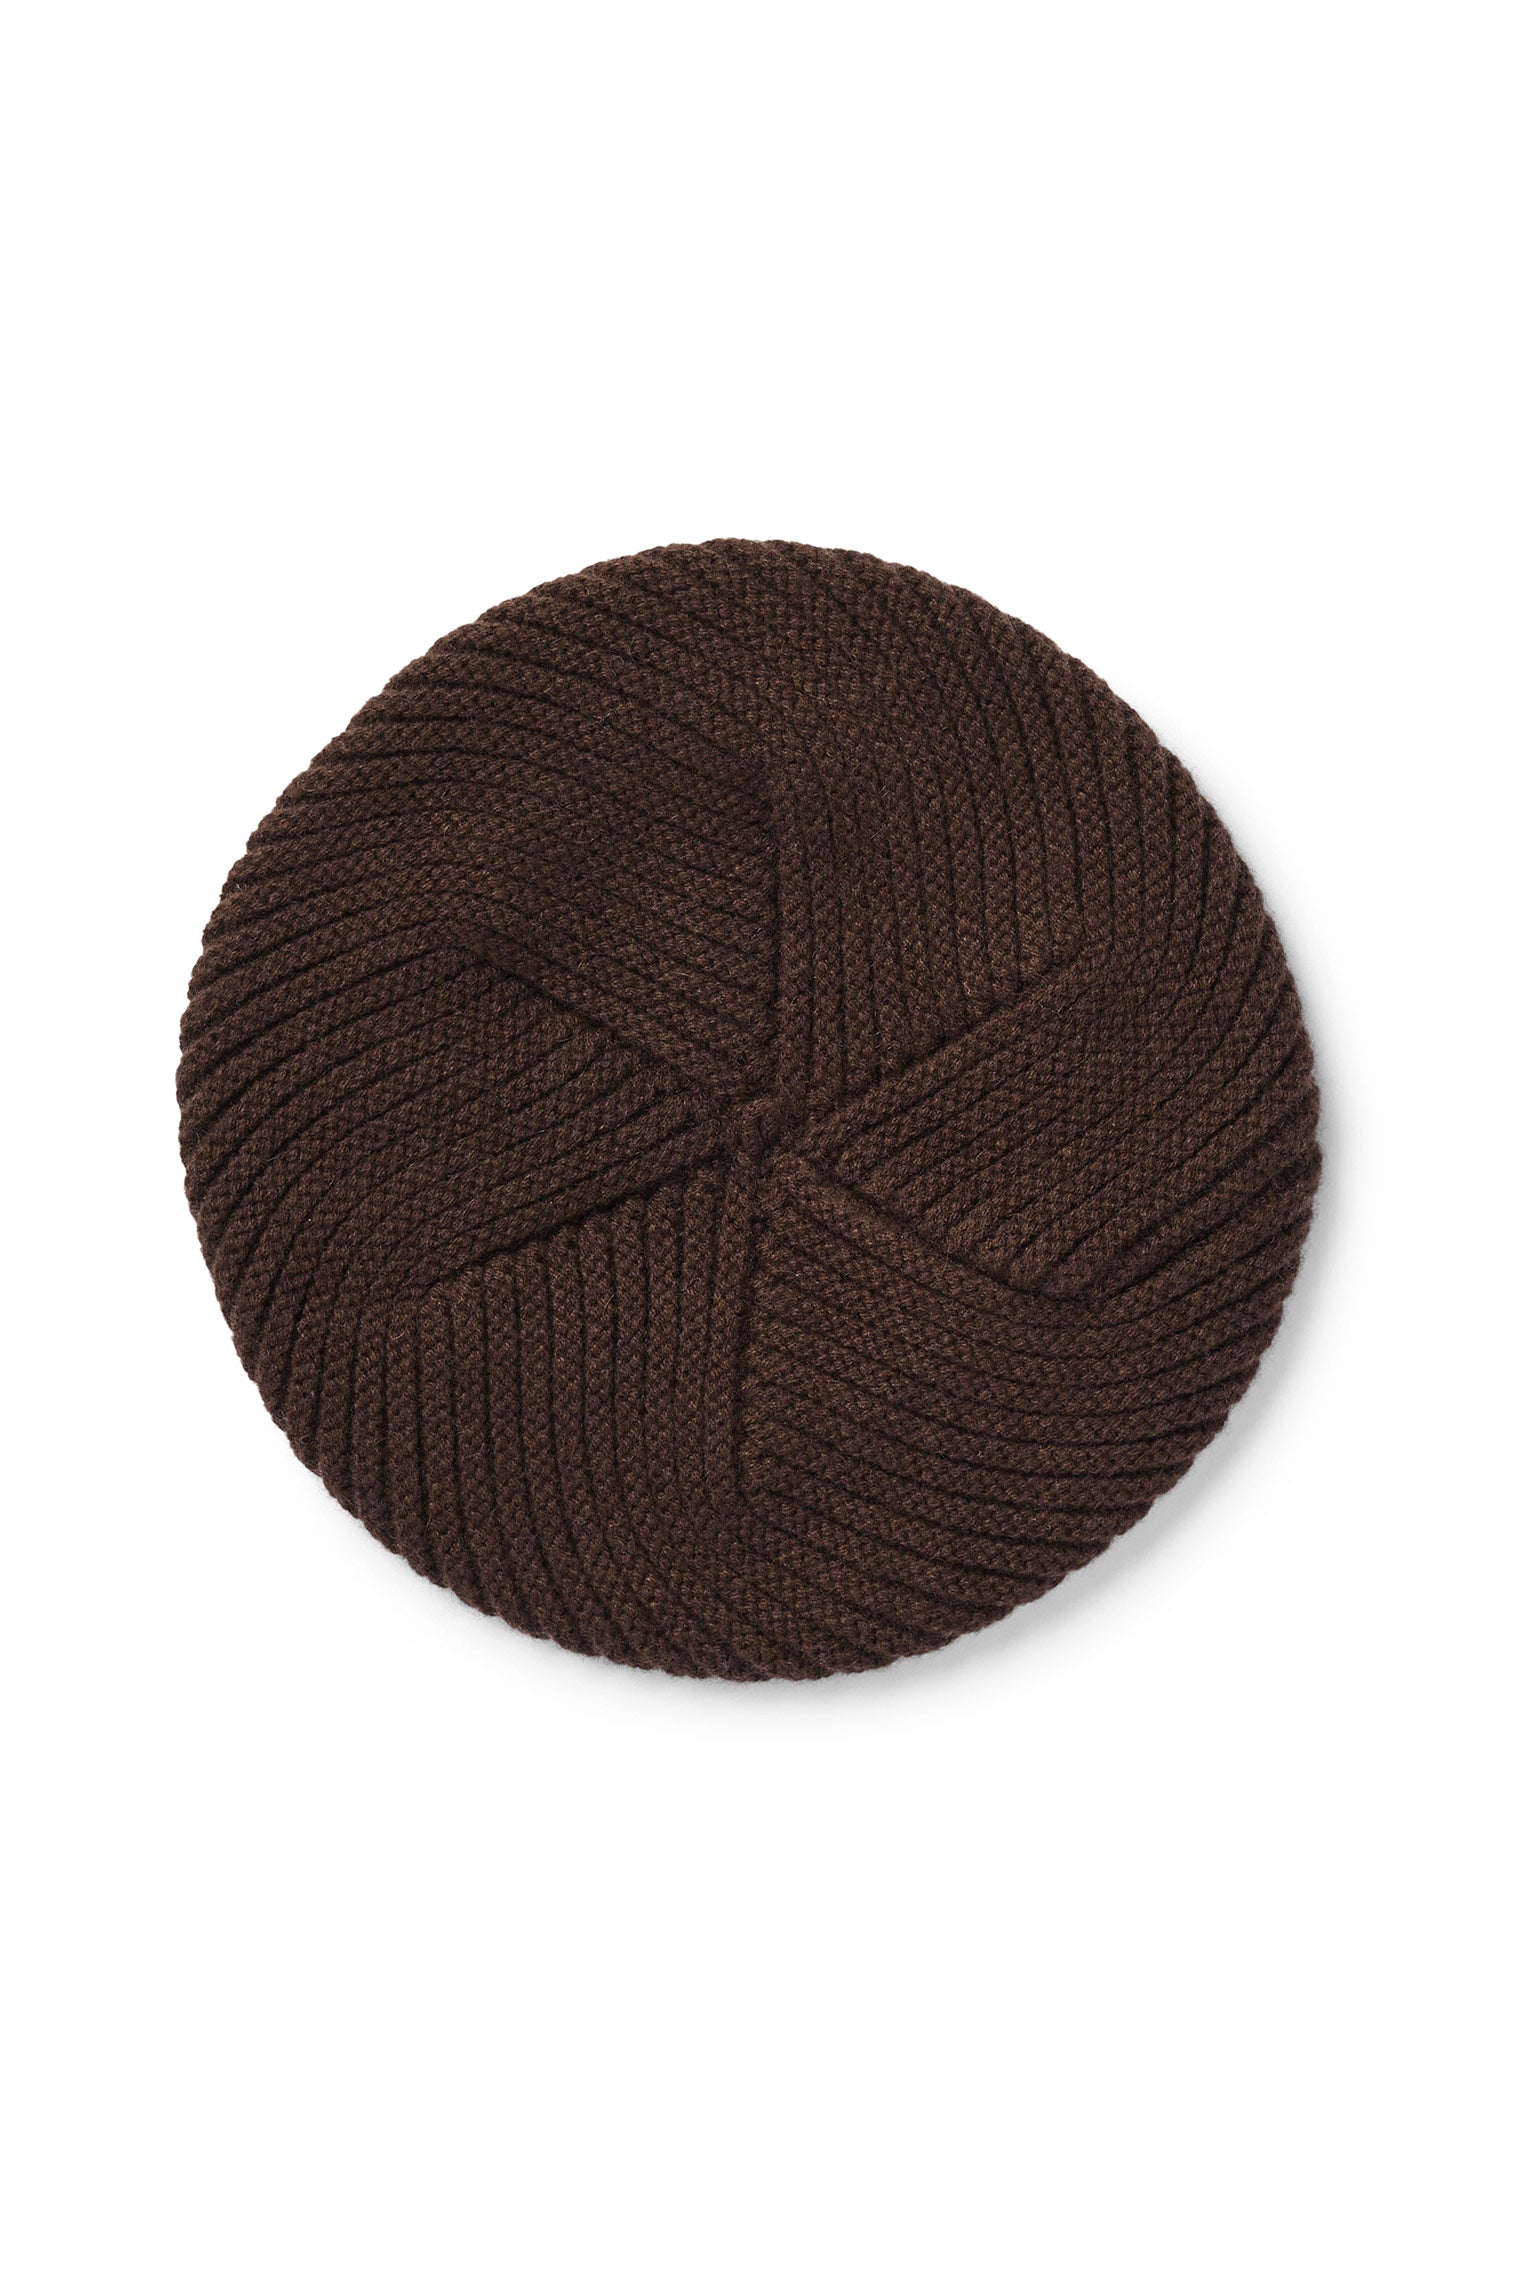 Brown Knitted Cashmere Beret - Men's & Women's Beanies - Lock & Co. Hatters London UK